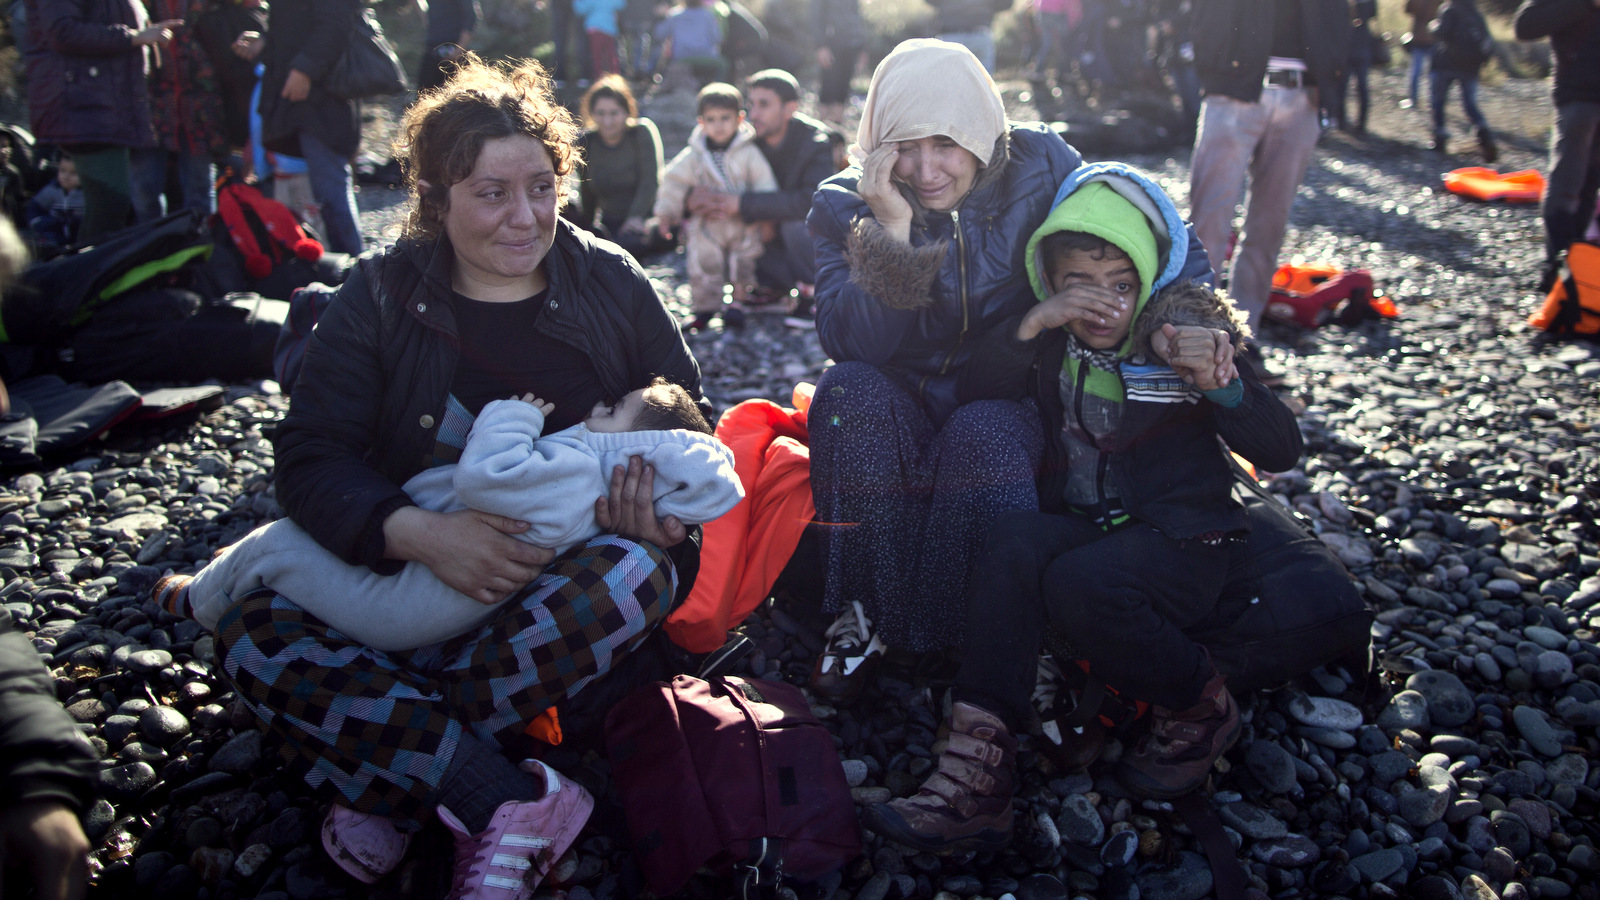 A Yazidi refugee family from Iraq cries while resting on the seashore shortly after arriving on a vessel from the Turkish coast to the northeastern Greek island of Lesbos, Thursday, Nov. 26, 2015. About 5,000 migrants are reaching Europe each day along the so-called Balkan migrant route, stoking tensions among the countries along the migrant corridor including Greece, Macedonia, Serbia, Croatia and Slovenia. (AP Photo/Muhammed Muheisen)